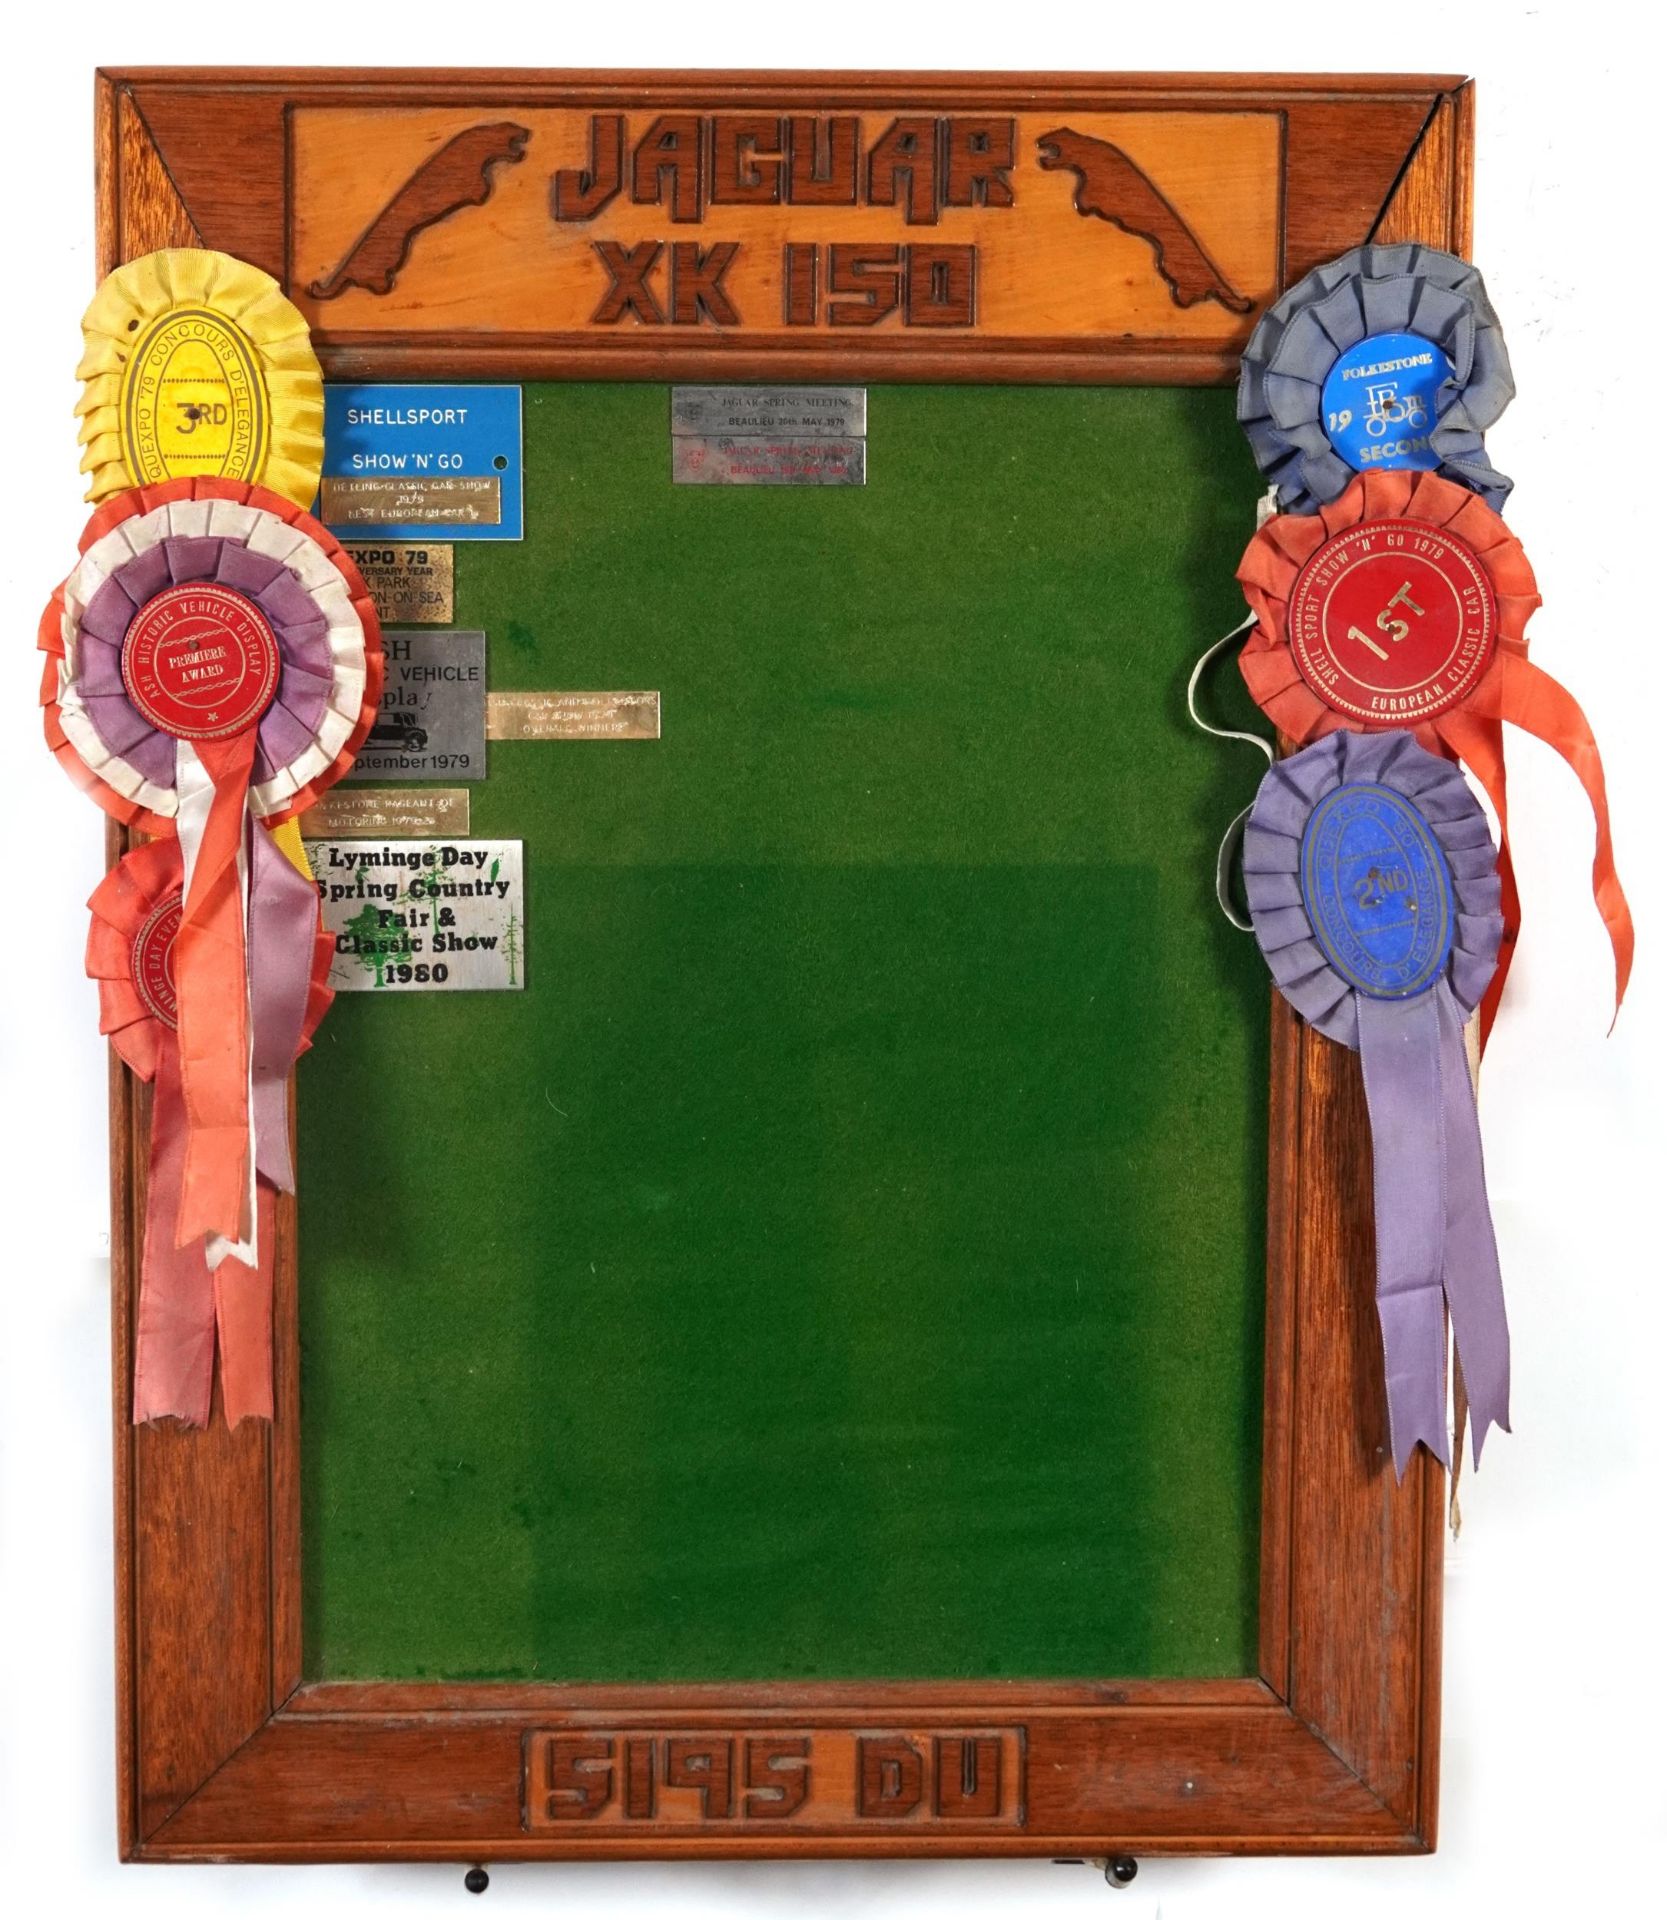 Jaguar XK150 car rally display board with rosettes and plaques, 60cm x 45cm : For further